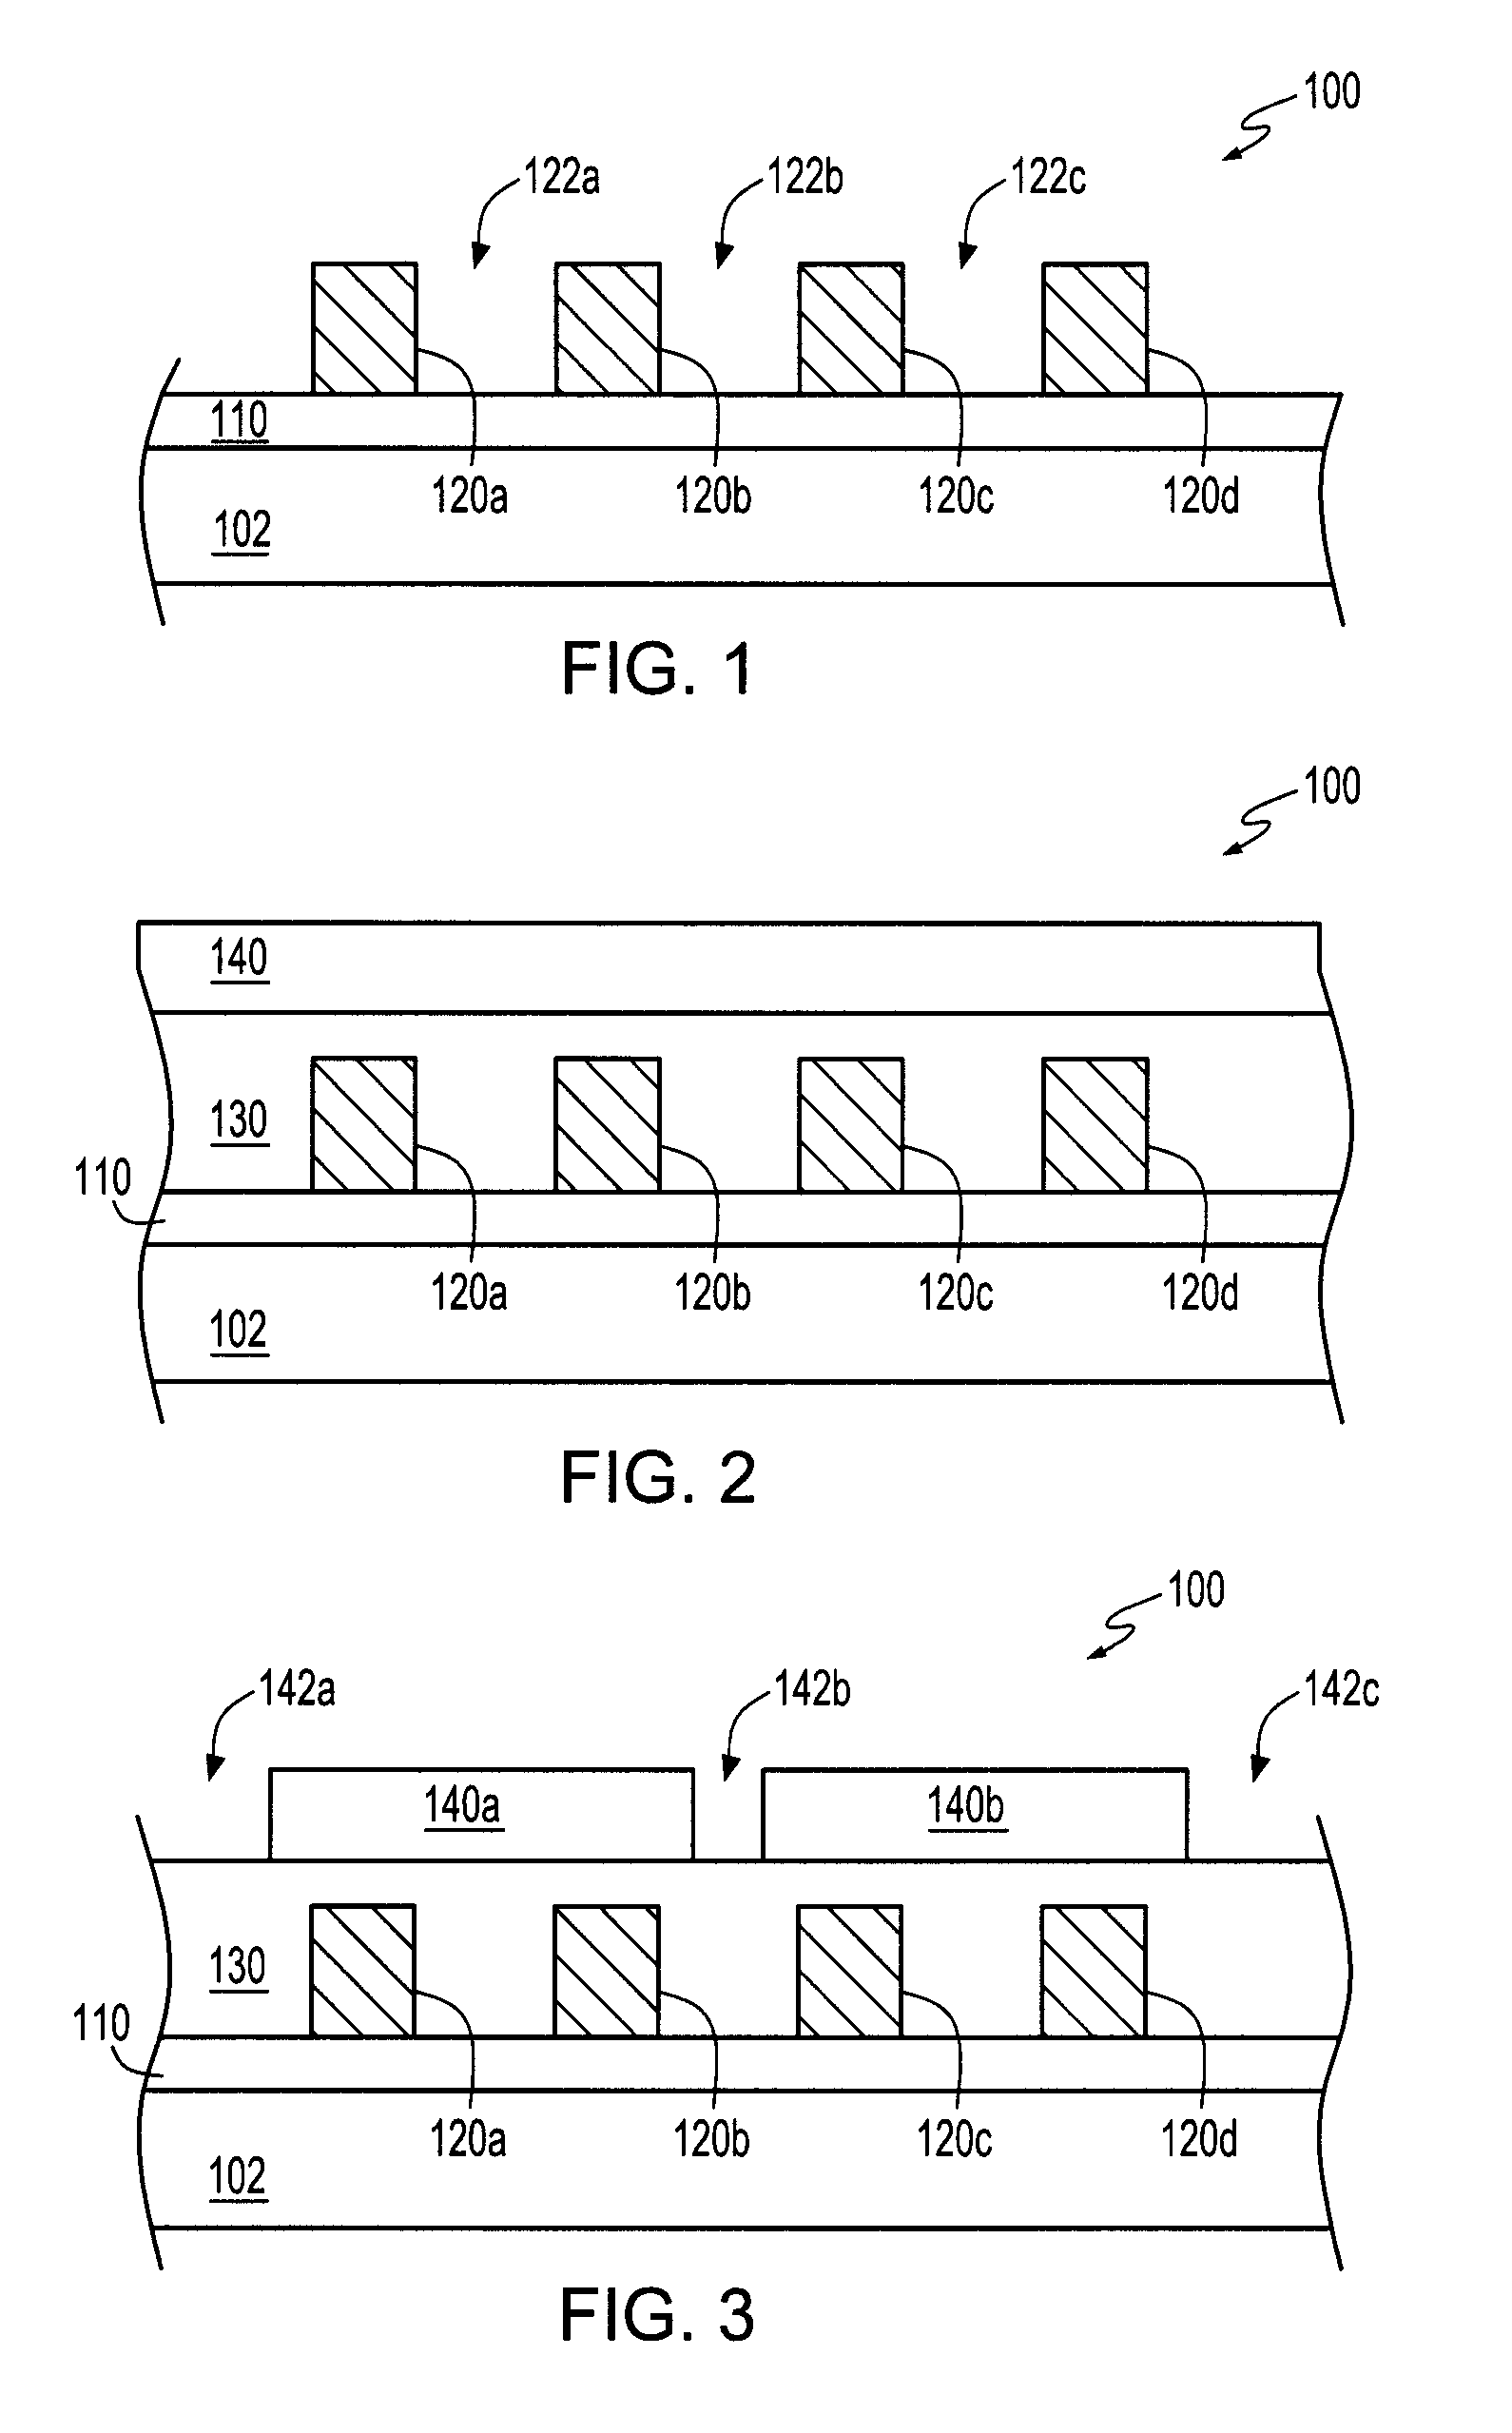 Air gap interconnect structure and method of manufacture